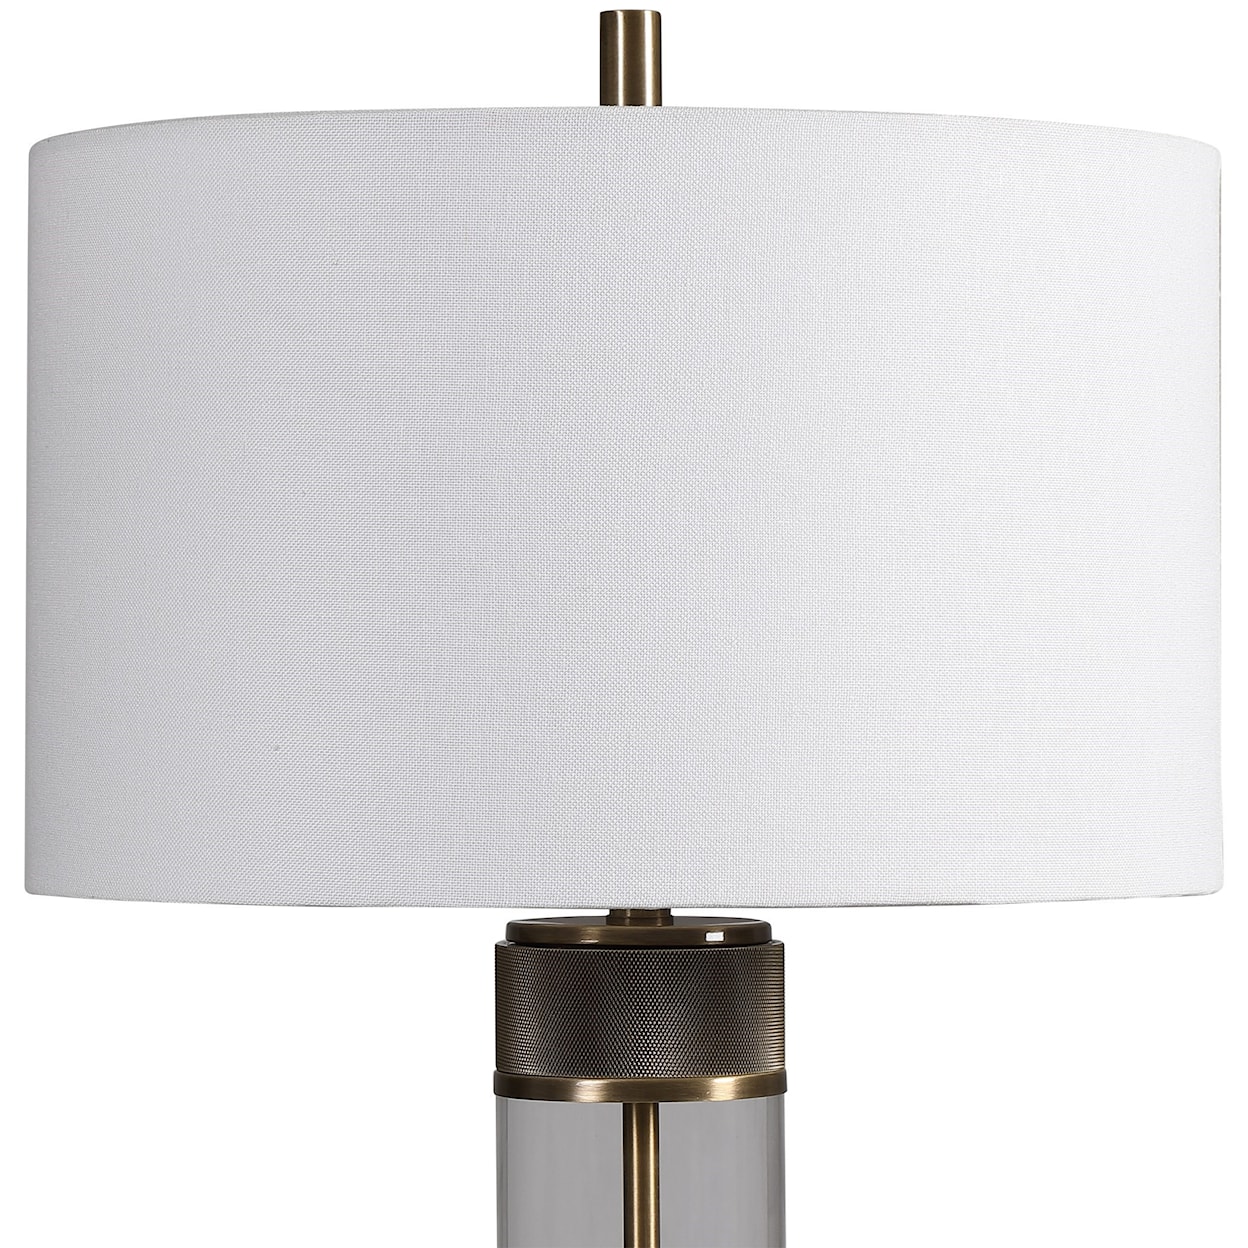 Uttermost Table Lamps Anmer Industrial Table Lamp